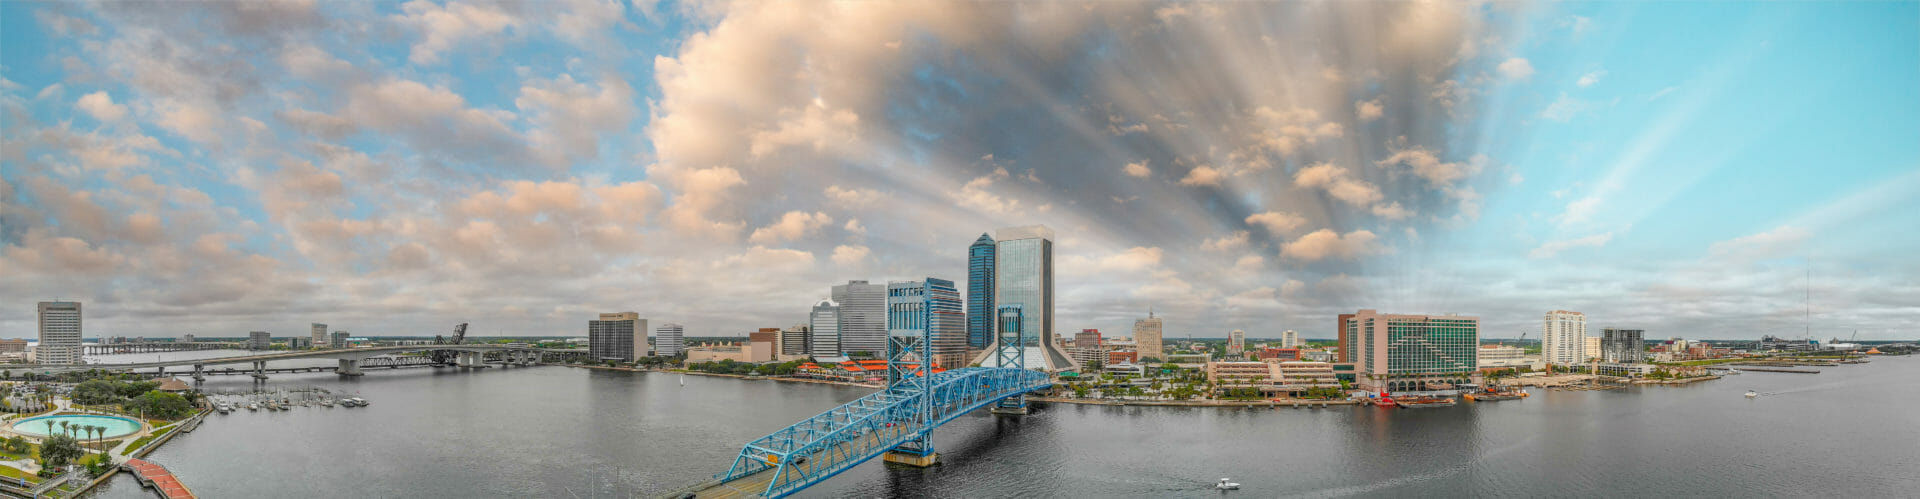 View of Jacksonville Florida at sunset